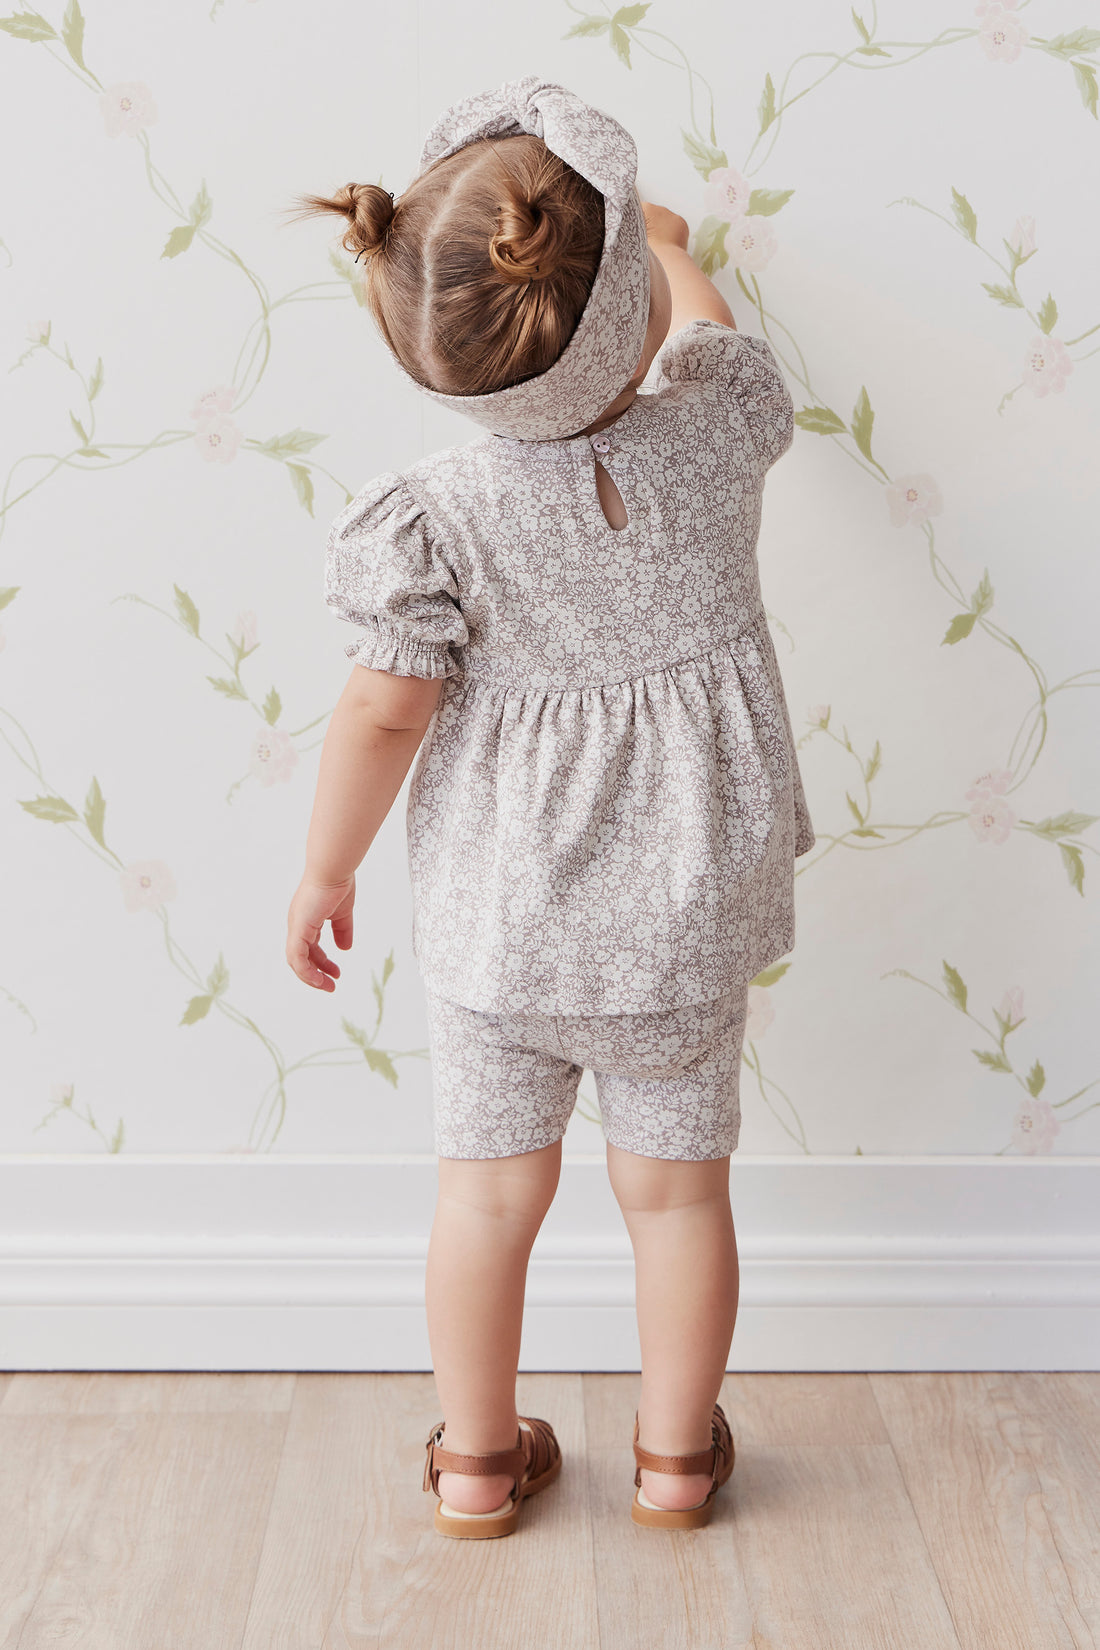 Organic Cotton Camille Top - Greta Floral Bark Childrens Top from Jamie Kay NZ